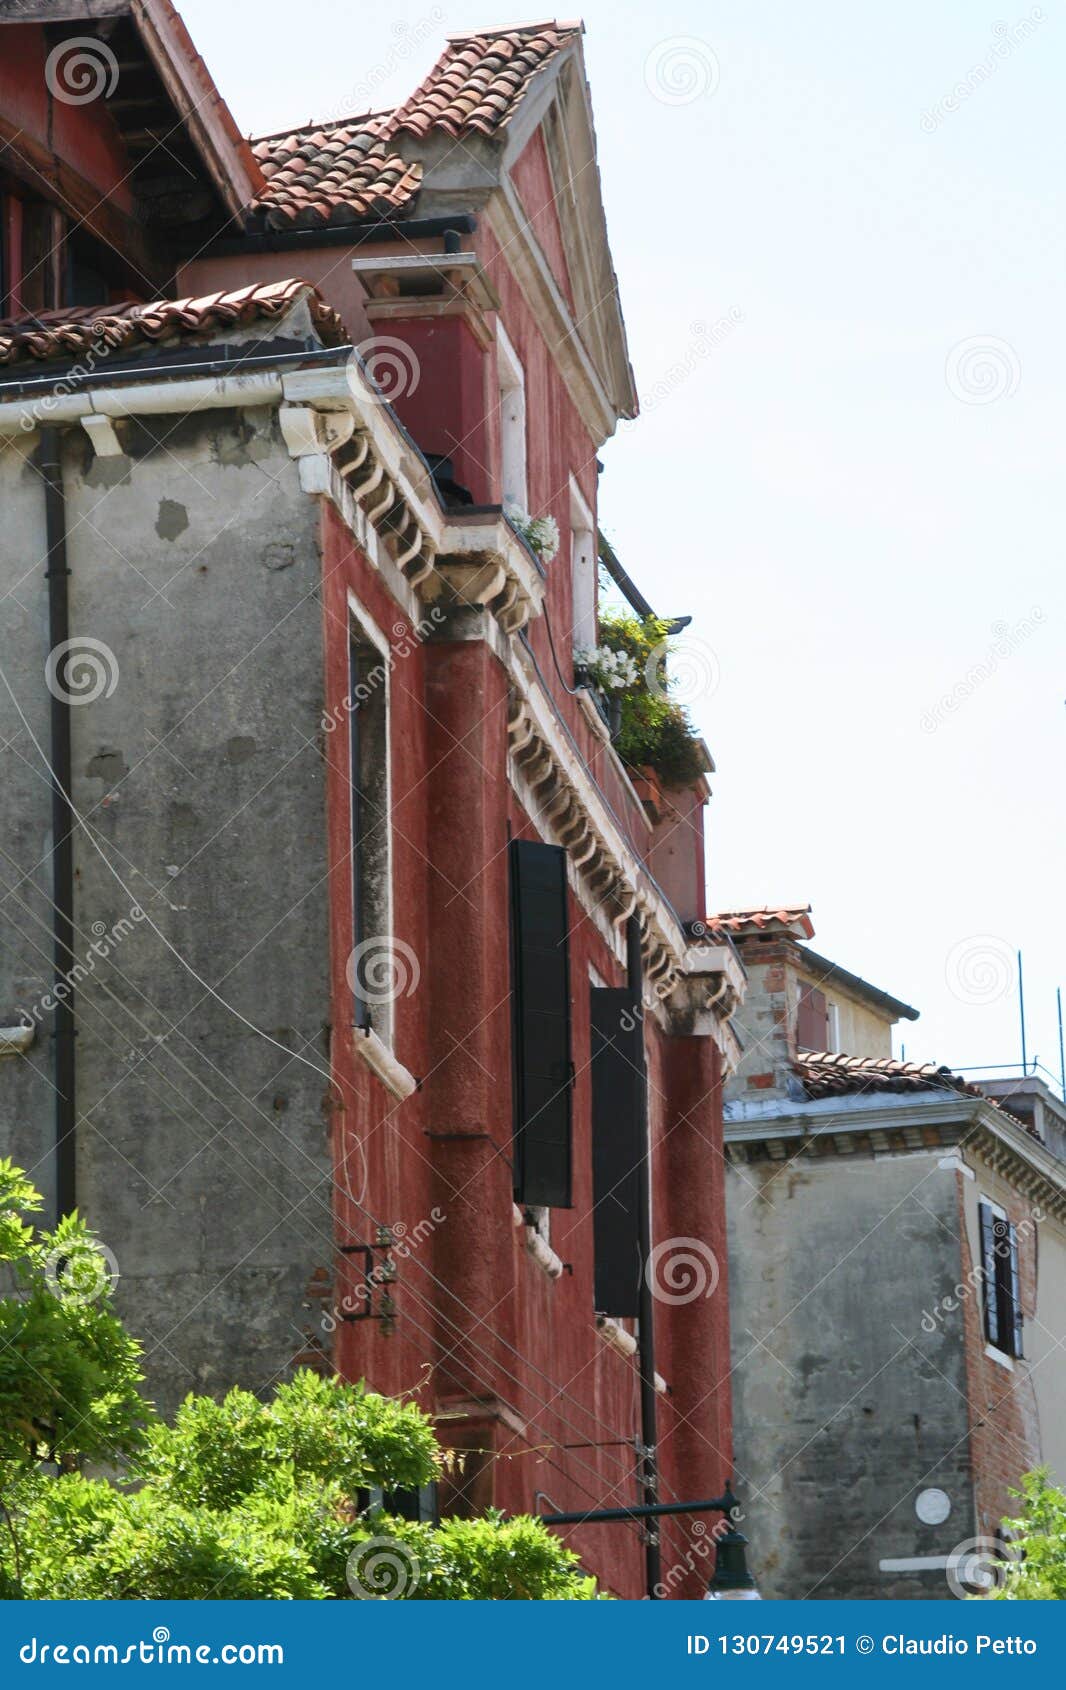 Venice Traditional House With Garden Stock Image Image Of